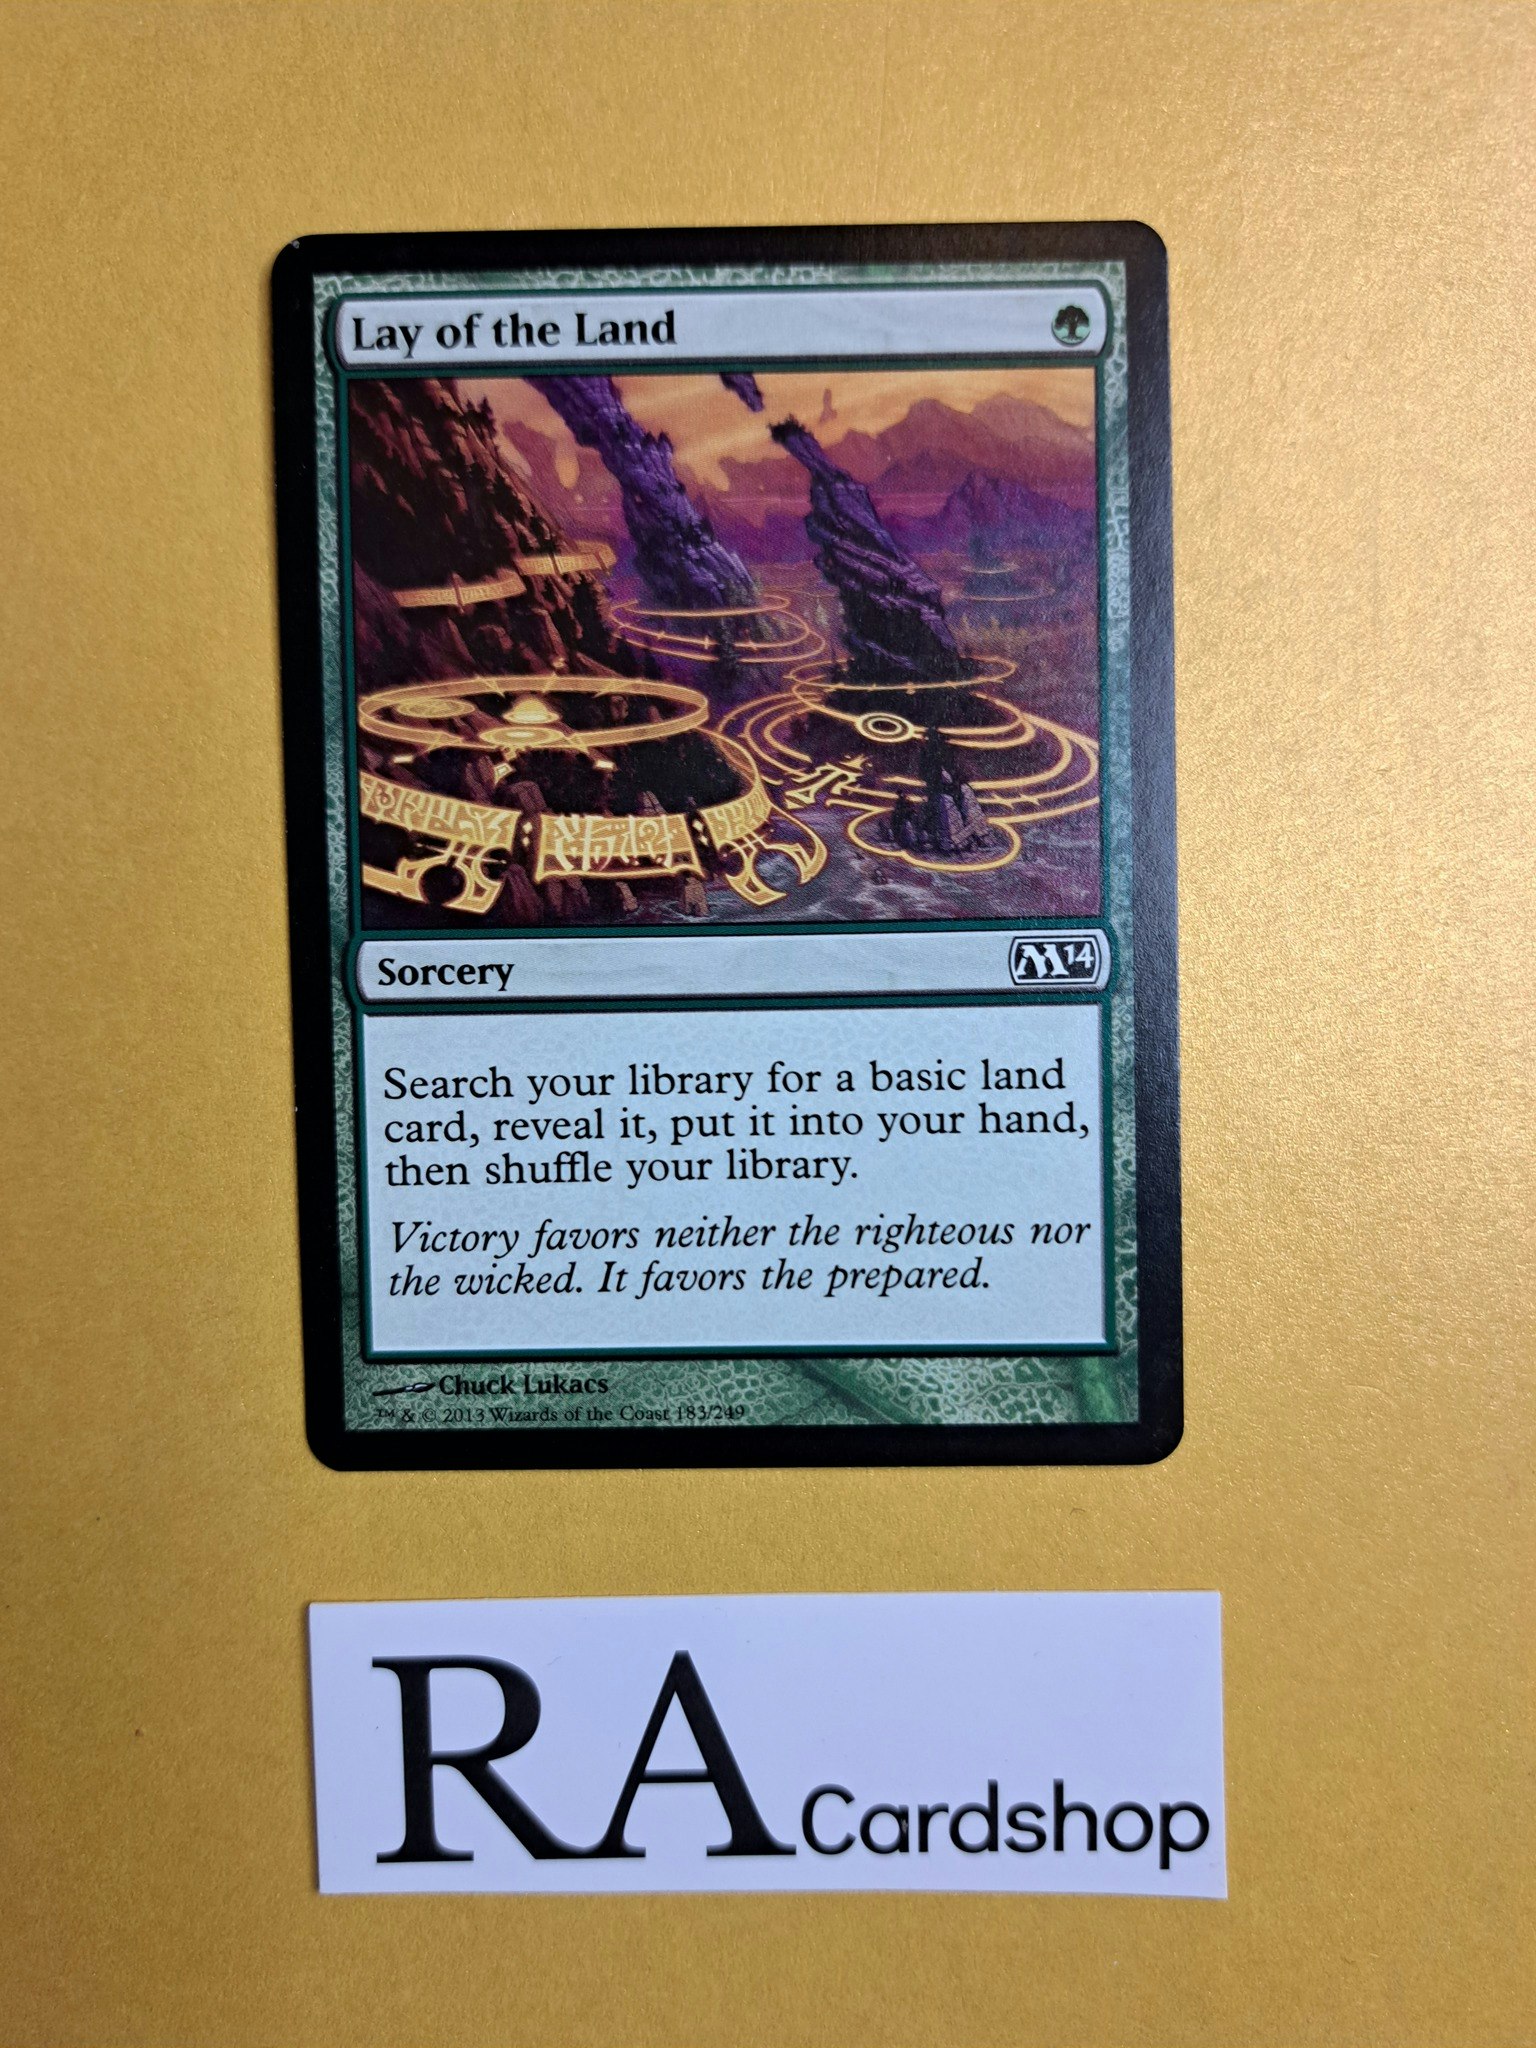 Lay of the Land Common 183/249 Magic 2014 (M14) Magic the Gathering